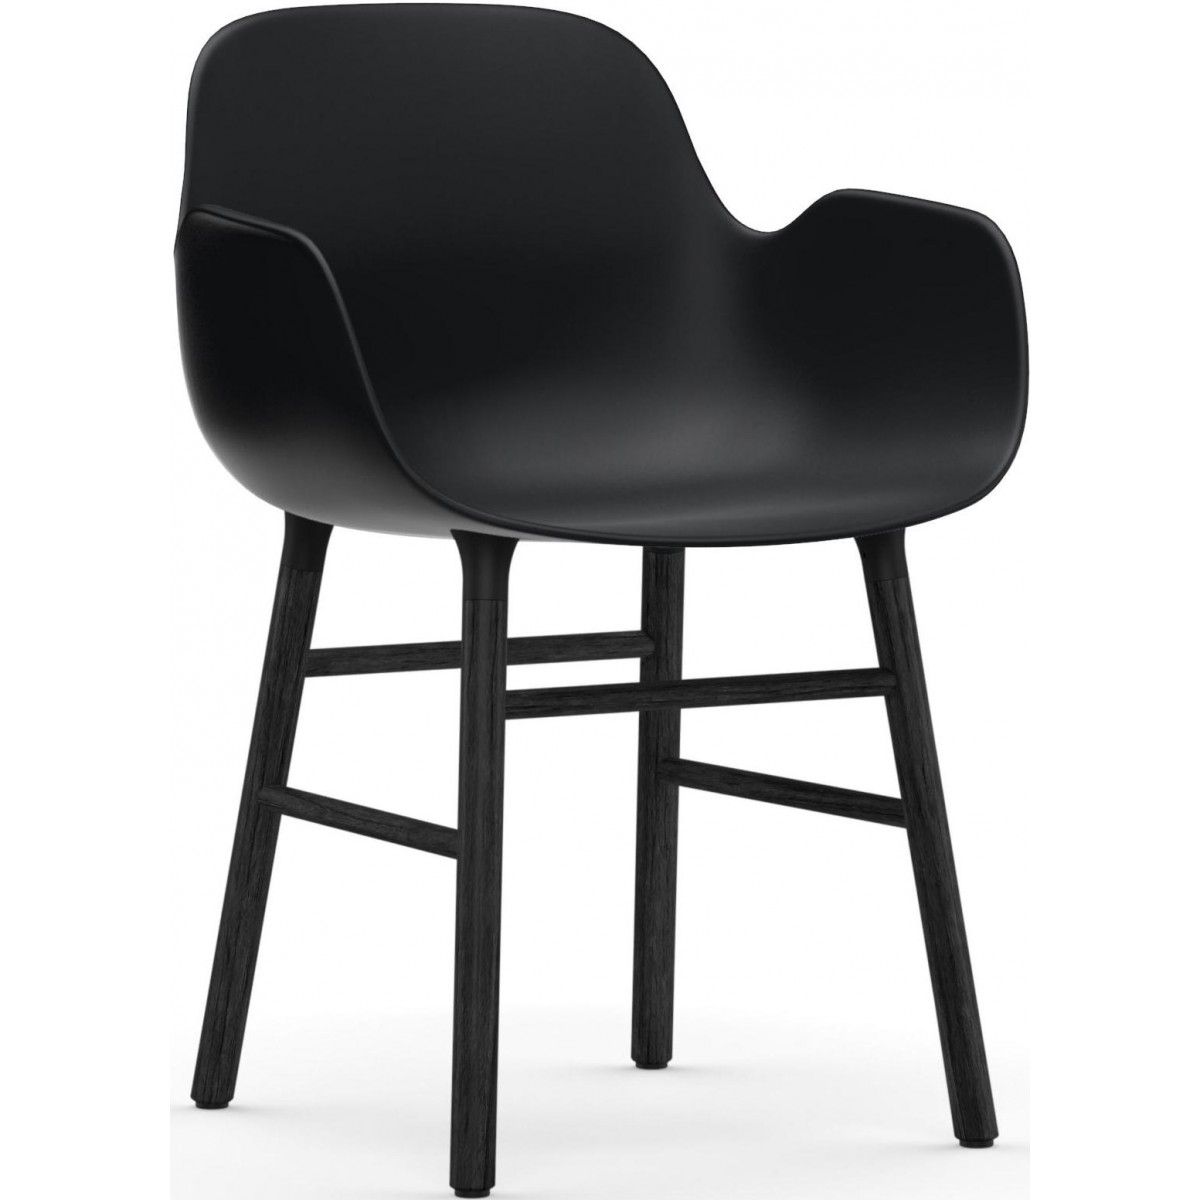 Black / Black lacquered oak  – Form Chair with armrests